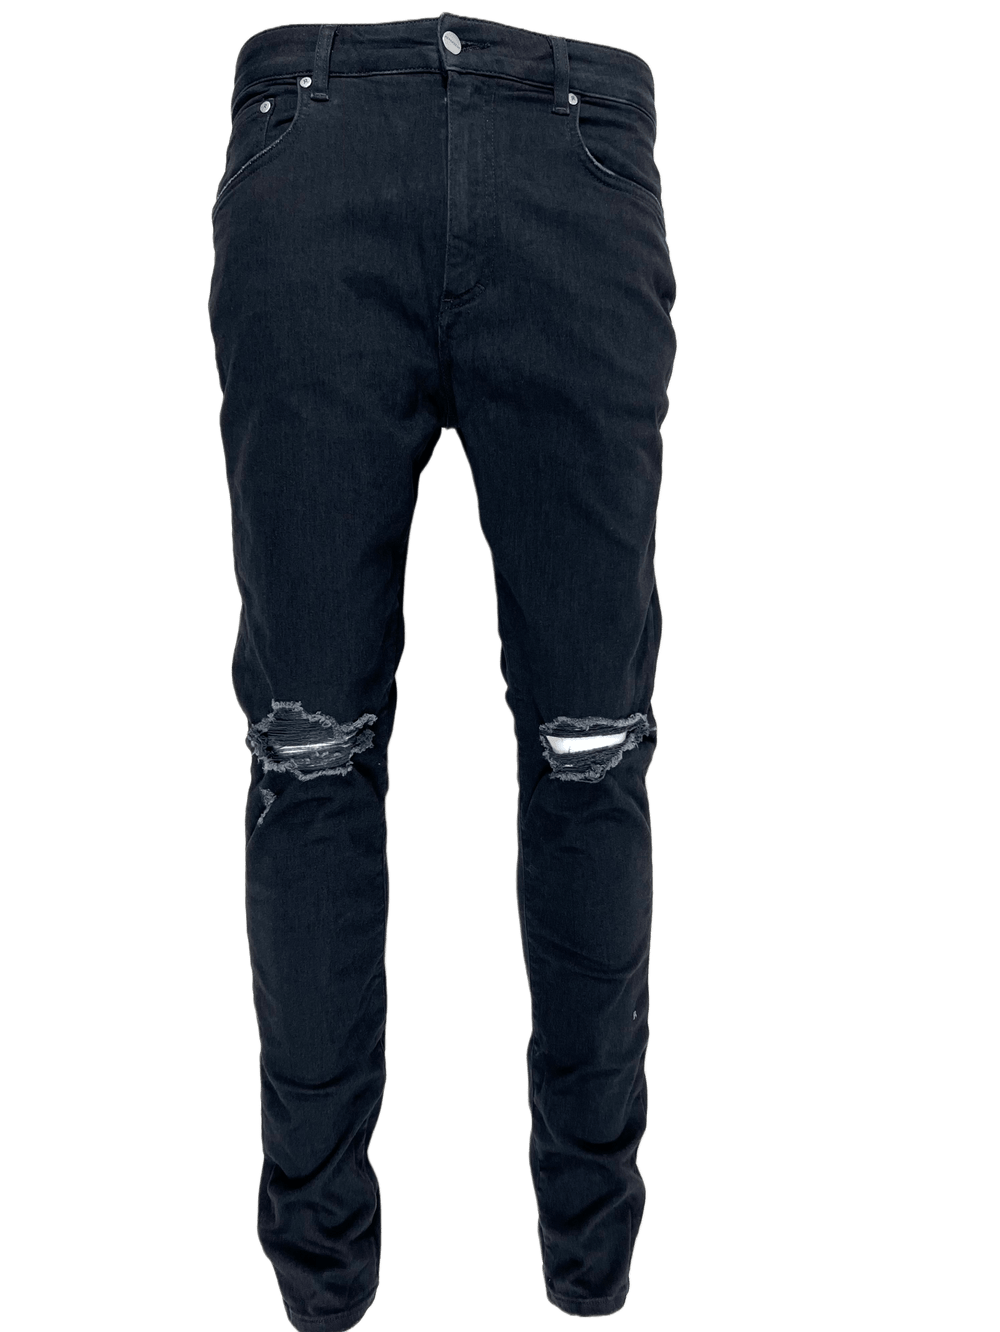 A pair of black REPRESENT M07044 DESTROYER DENIM BLACK jeans with holes on the knees, reflecting a distressed style.